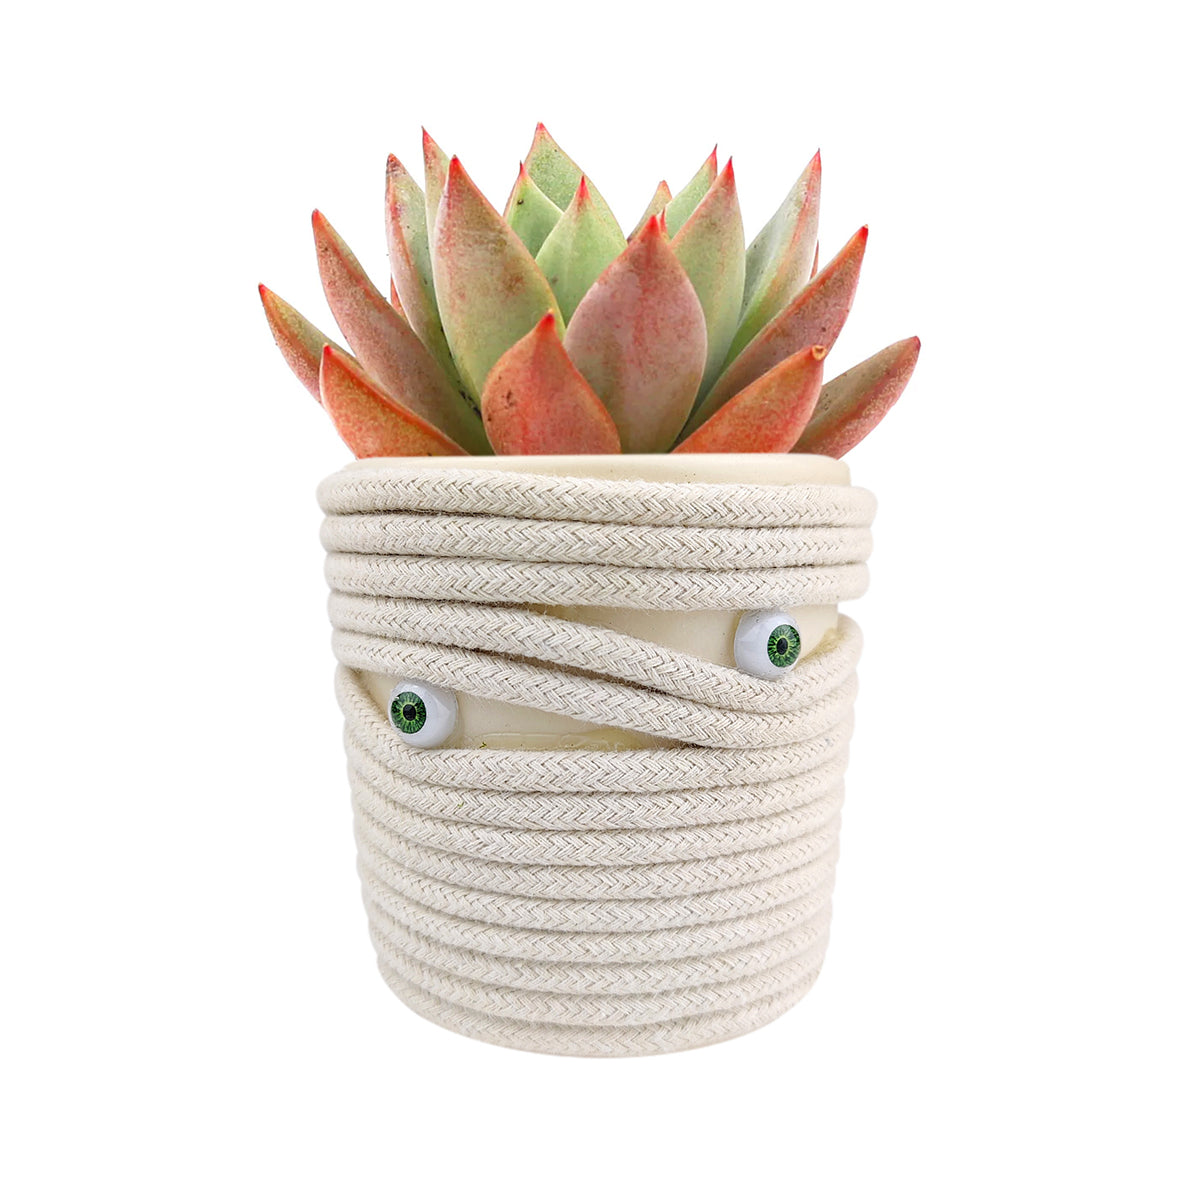 Mummy Eyes Pot, Creepy pots for Halloween, Clay pots for succulents and cacti, unique planter for sale